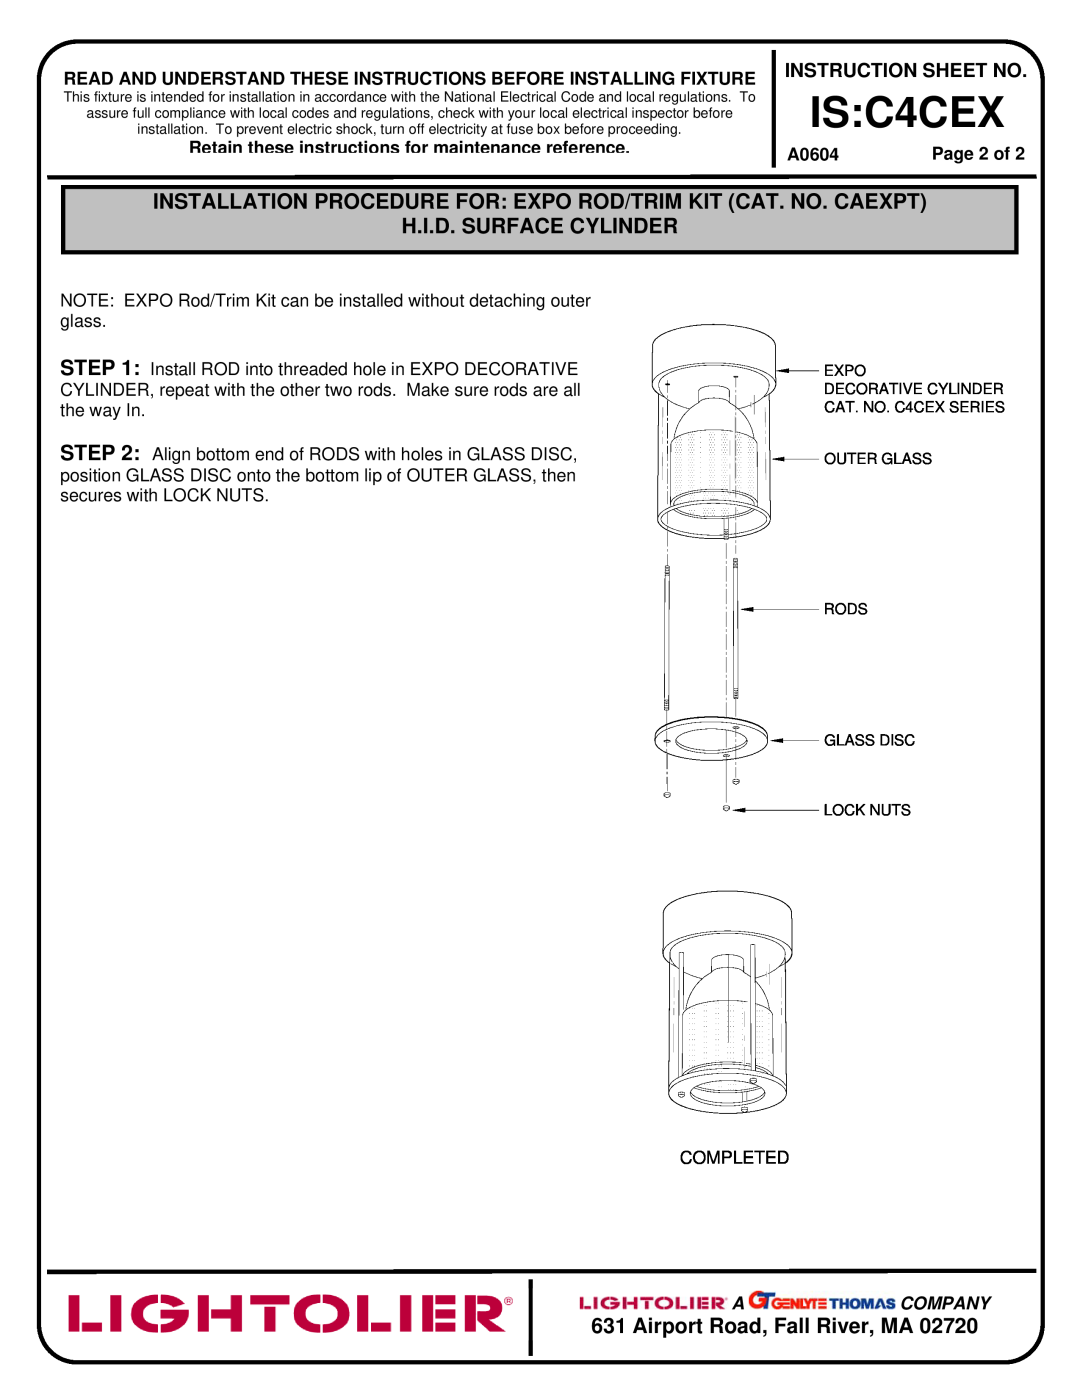 Lightolier H.I.D. Surface Cylinder, Page 2 of, IS C4CEX, Airport Road, Fall River, MA, Instruction Sheet No, A0604 